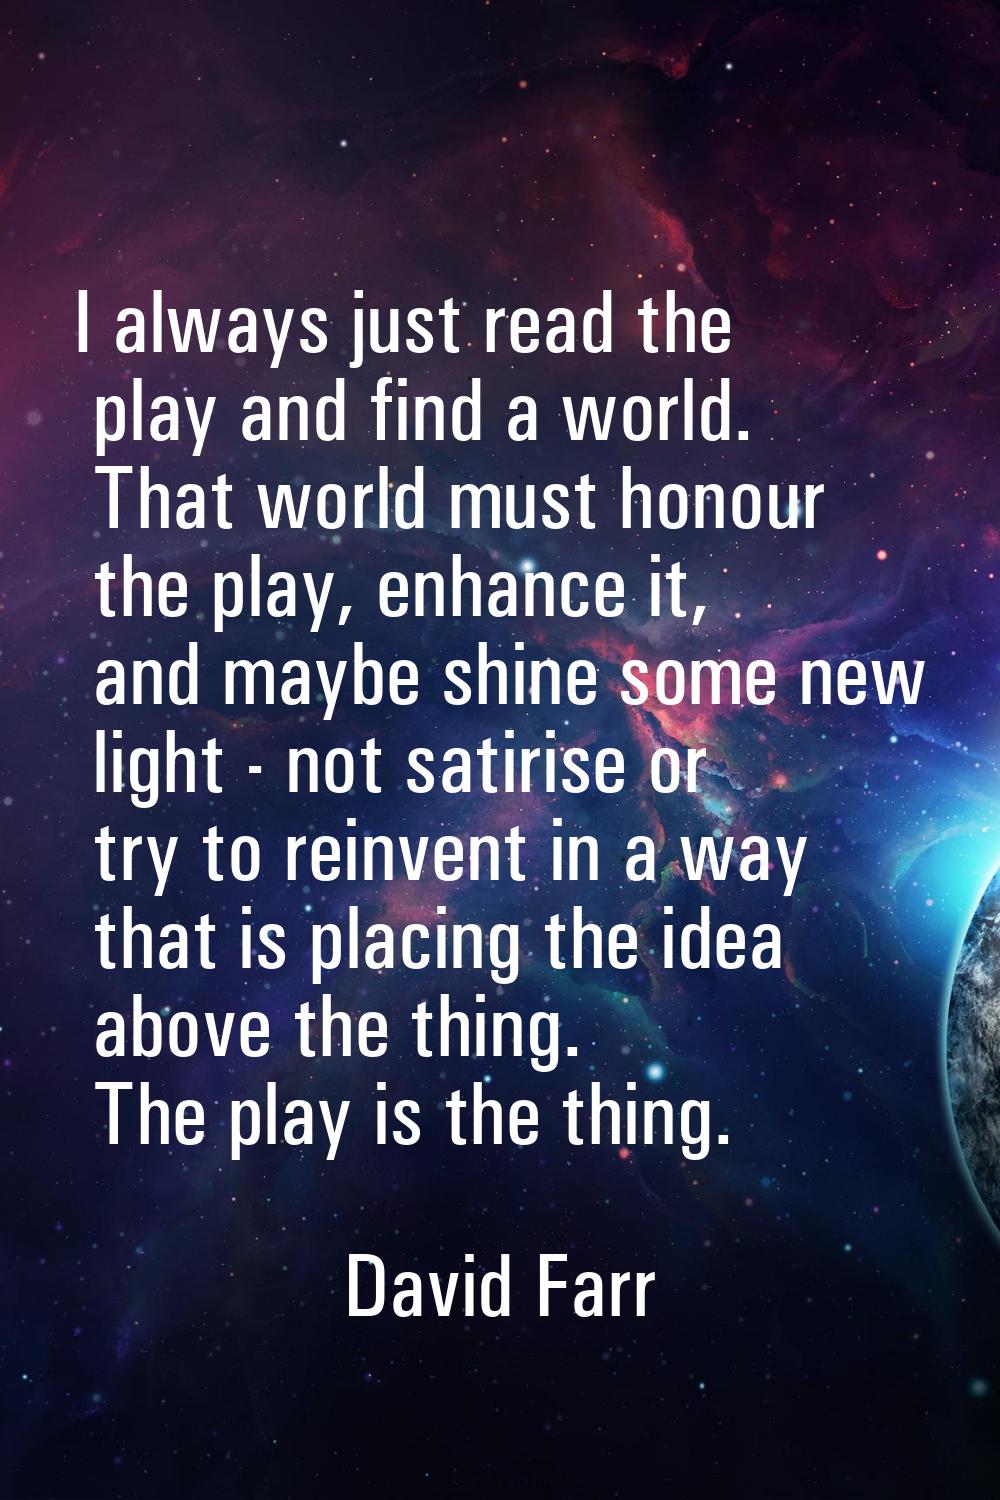 I always just read the play and find a world. That world must honour the play, enhance it, and mayb